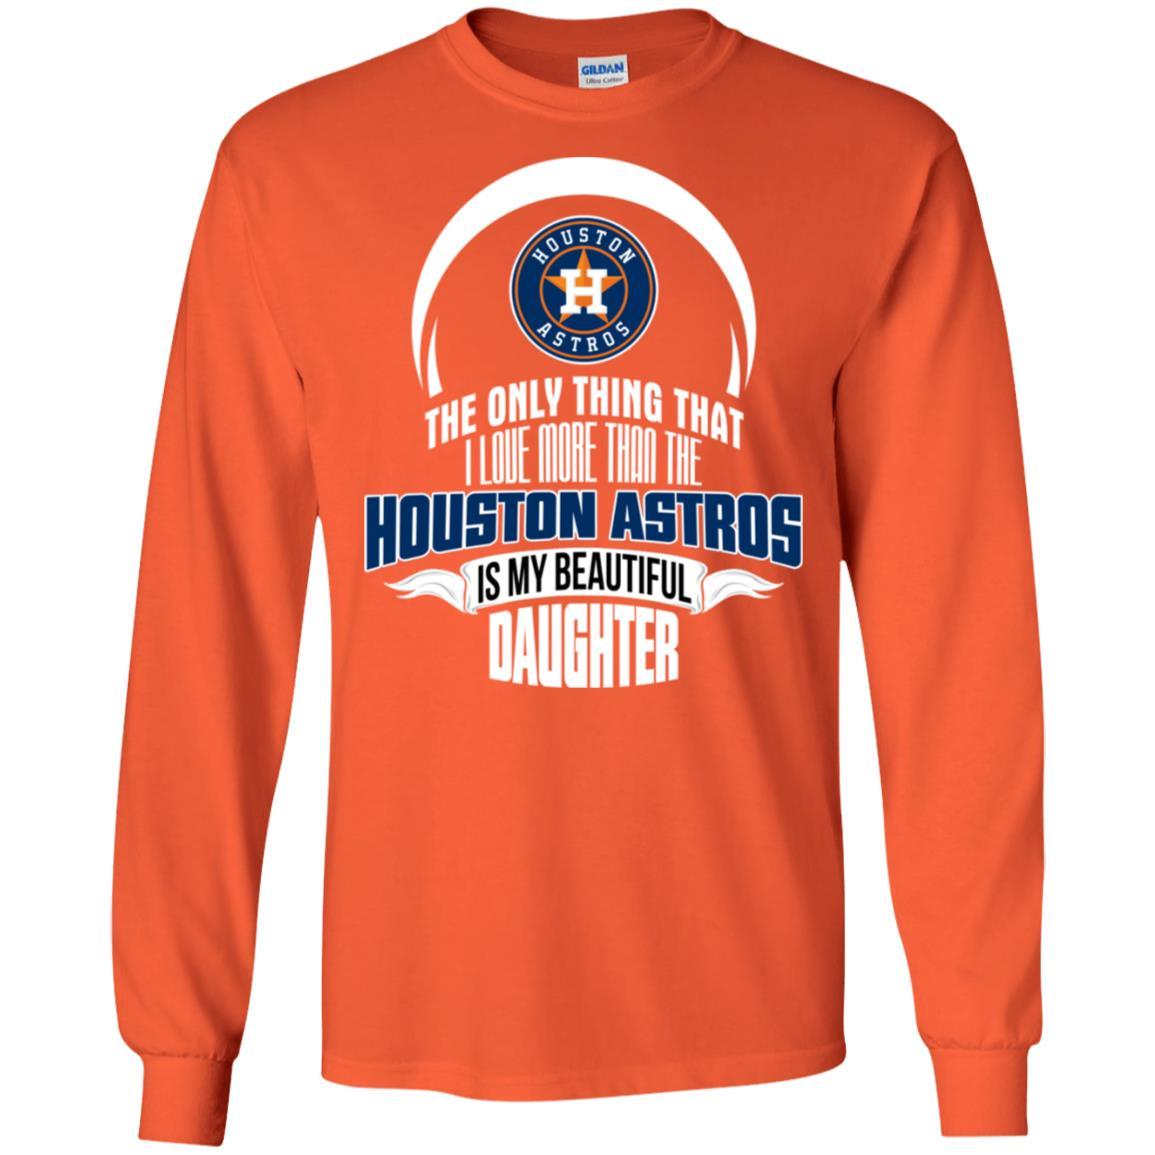 Proud Of Dad Of An Awesome Daughter Houston Astros T Shirts – Best Funny  Store